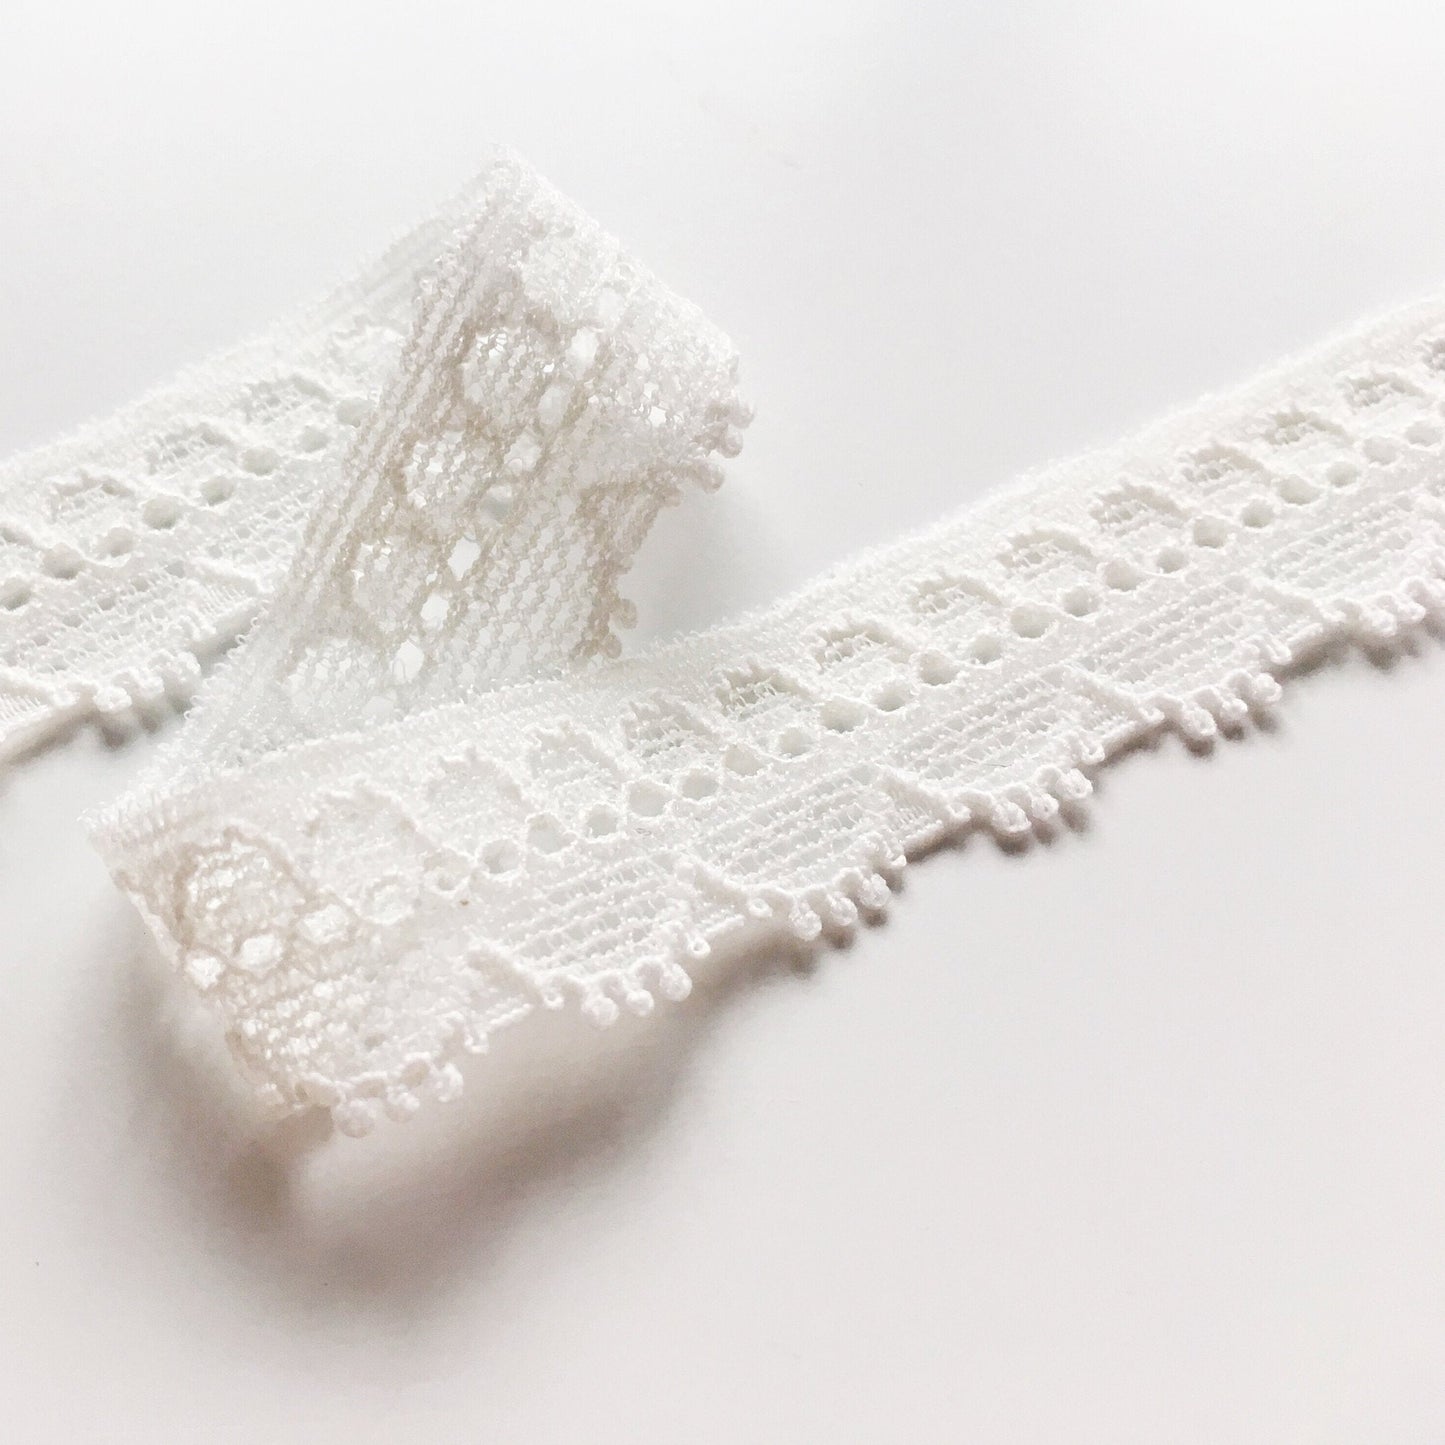 Narrow Stretch Lace Trim in Ivory | 1.8cm Wide | Lingerie Making Supplies | Price per metre